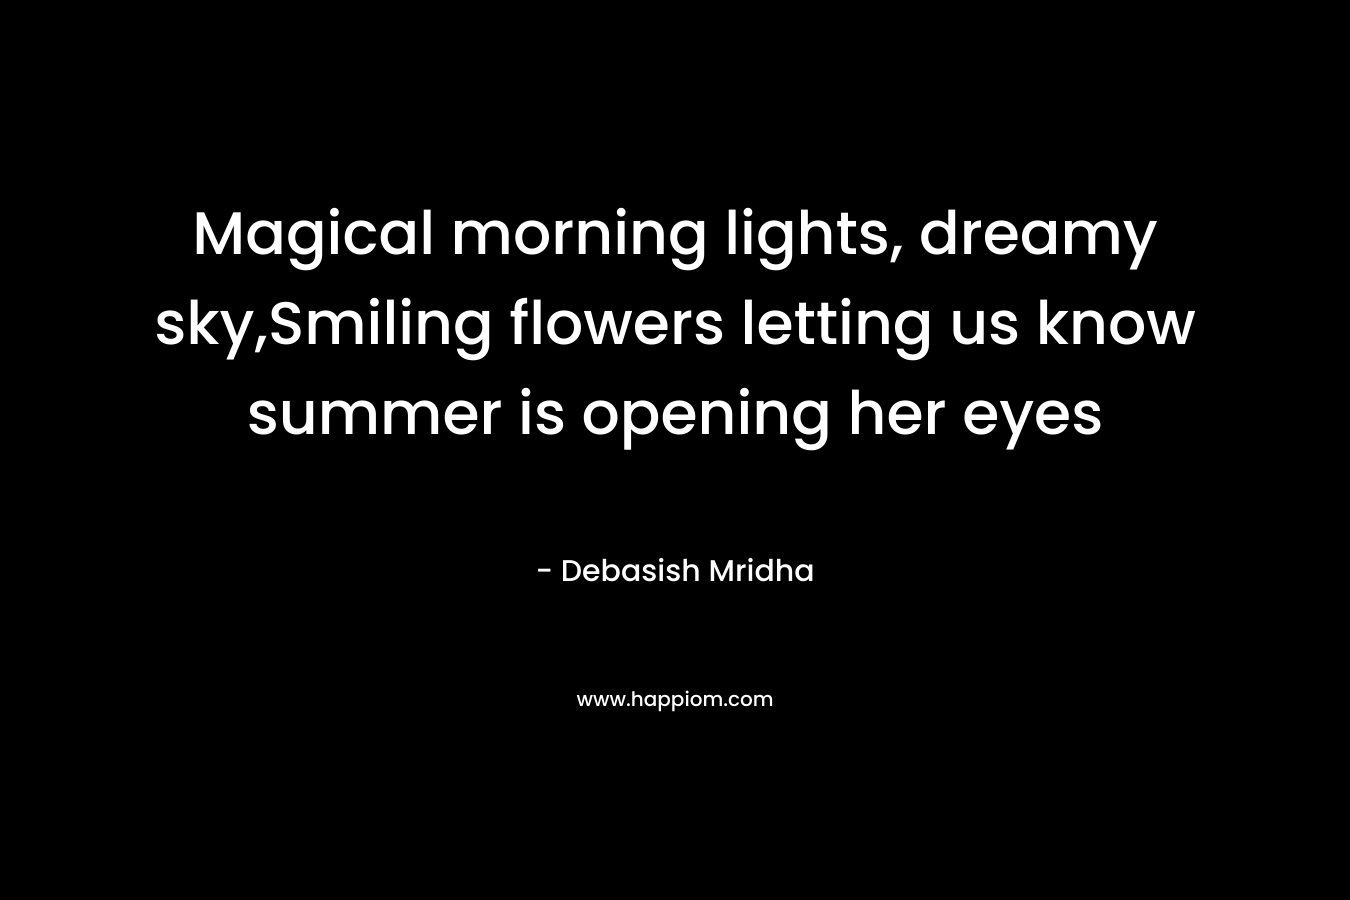 Magical morning lights, dreamy sky,Smiling flowers letting us know summer is opening her eyes